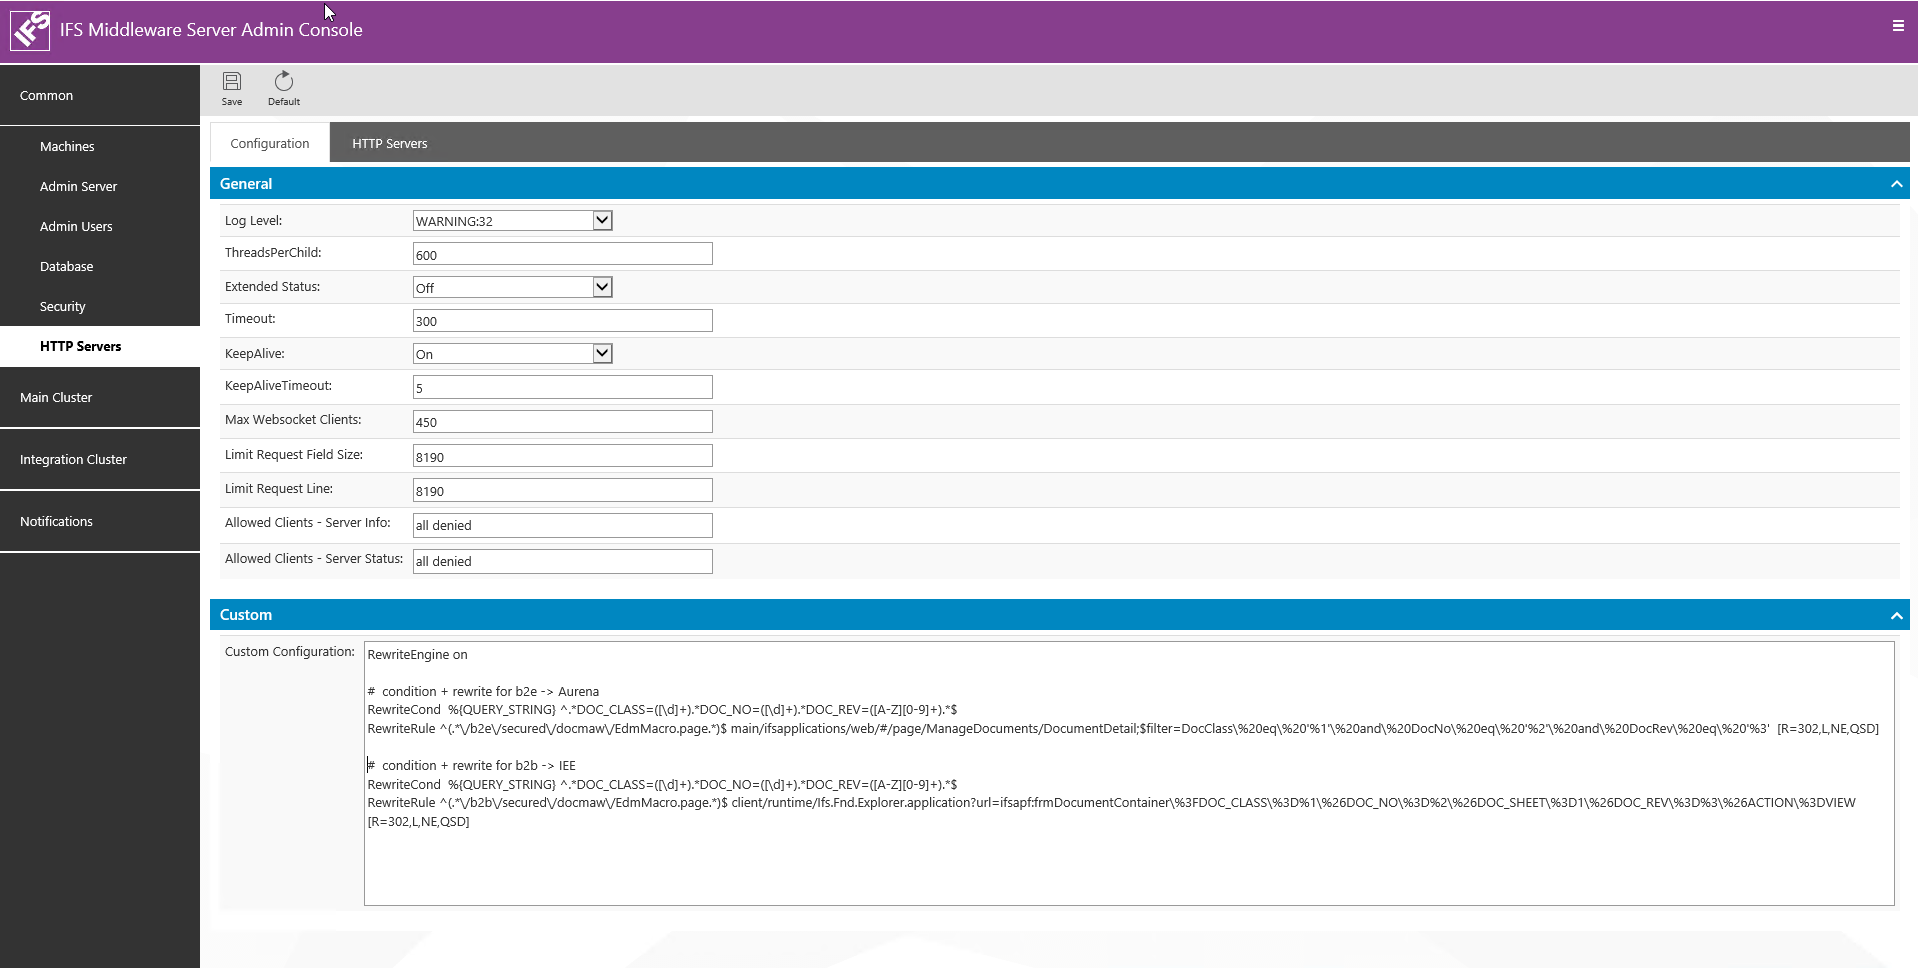 Screenshot of configuration for OHS